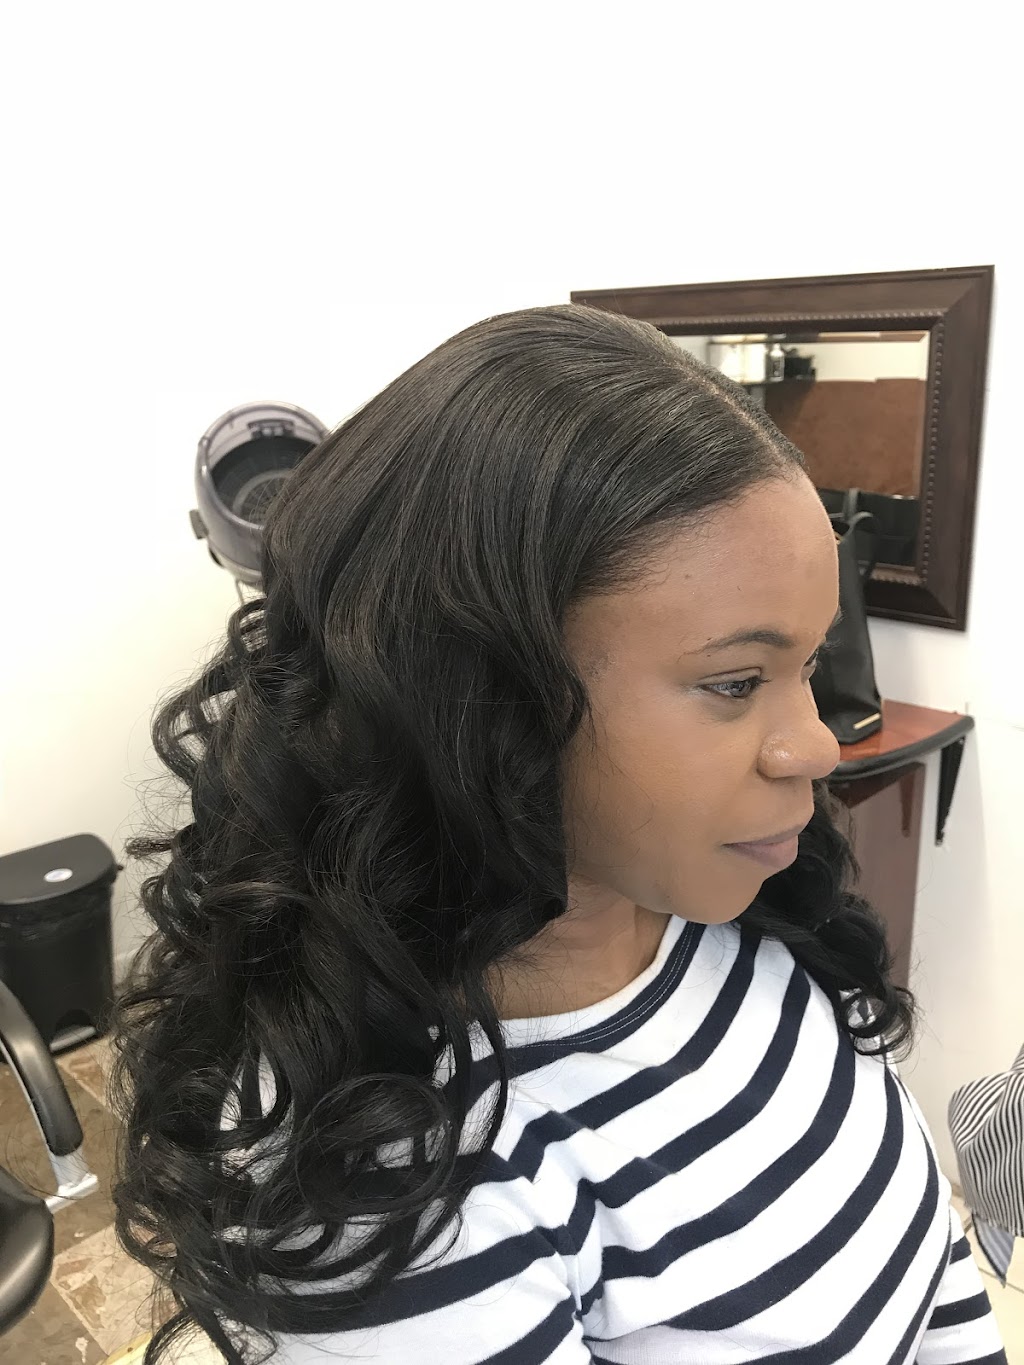 Trini Above The Rest Inc | 401 Crescent St., Brooklyn, NY 11208 | Phone: (908) 365-0626